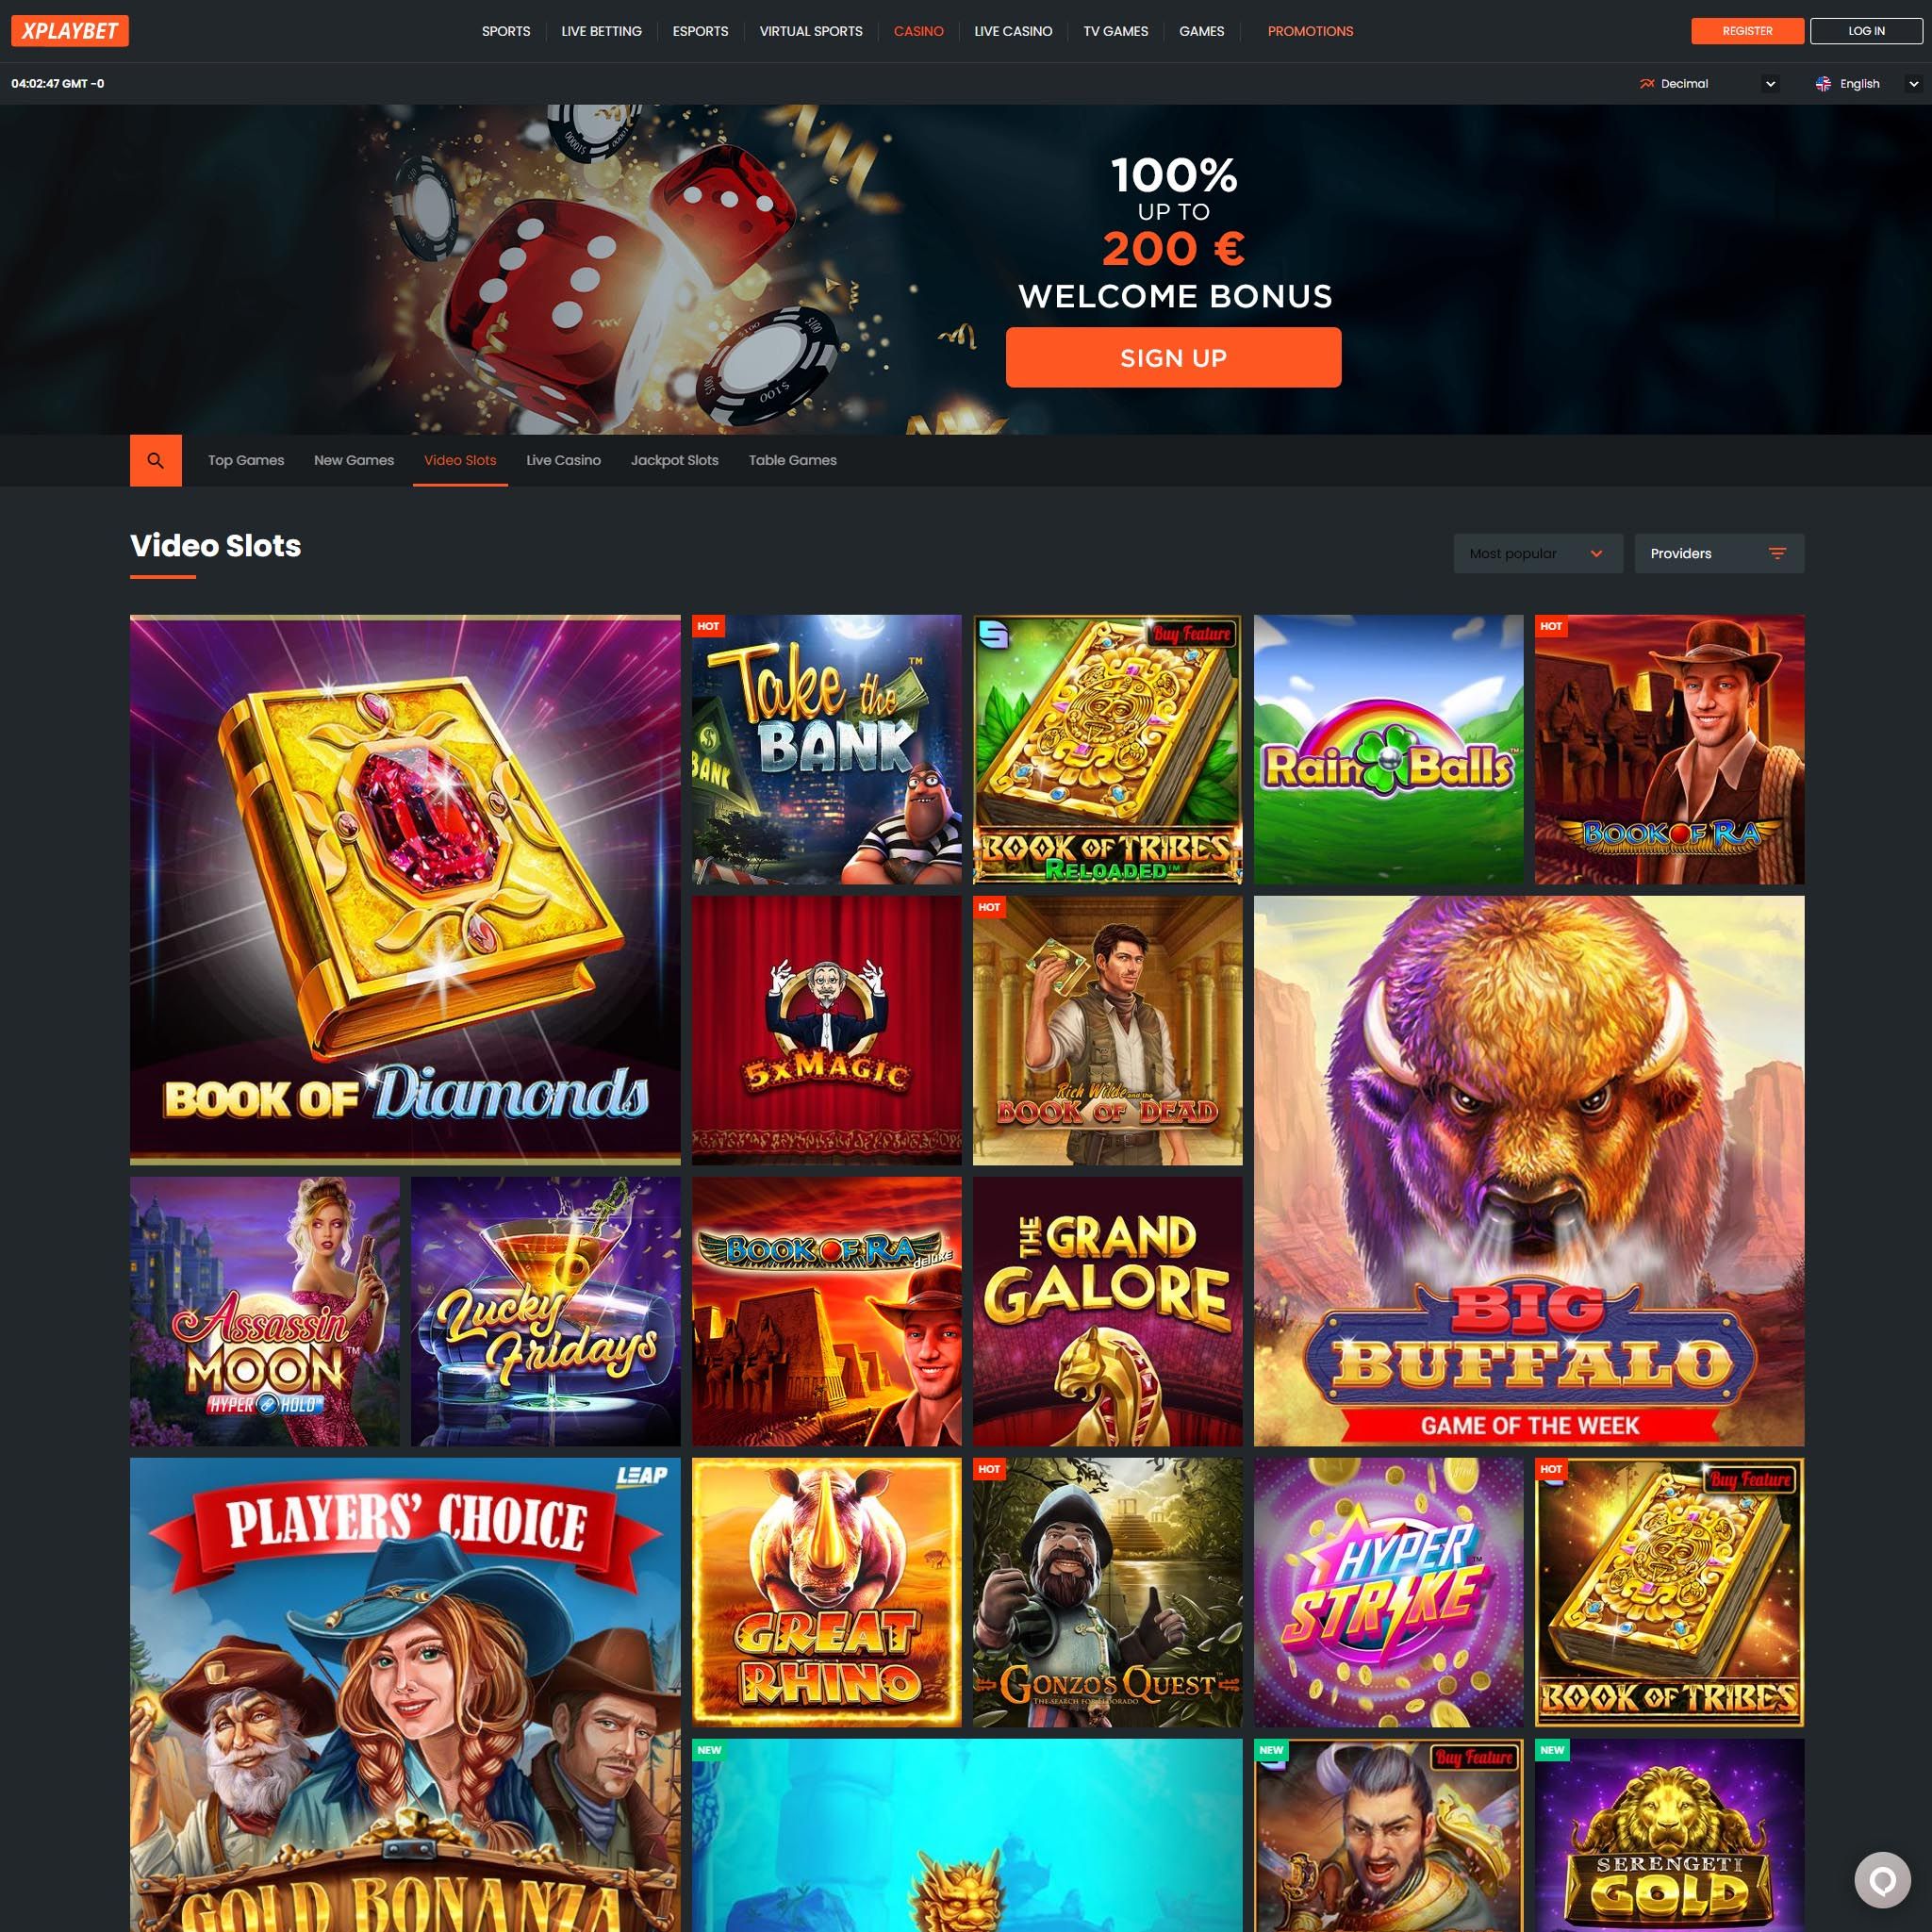 XplayBet full games catalogue